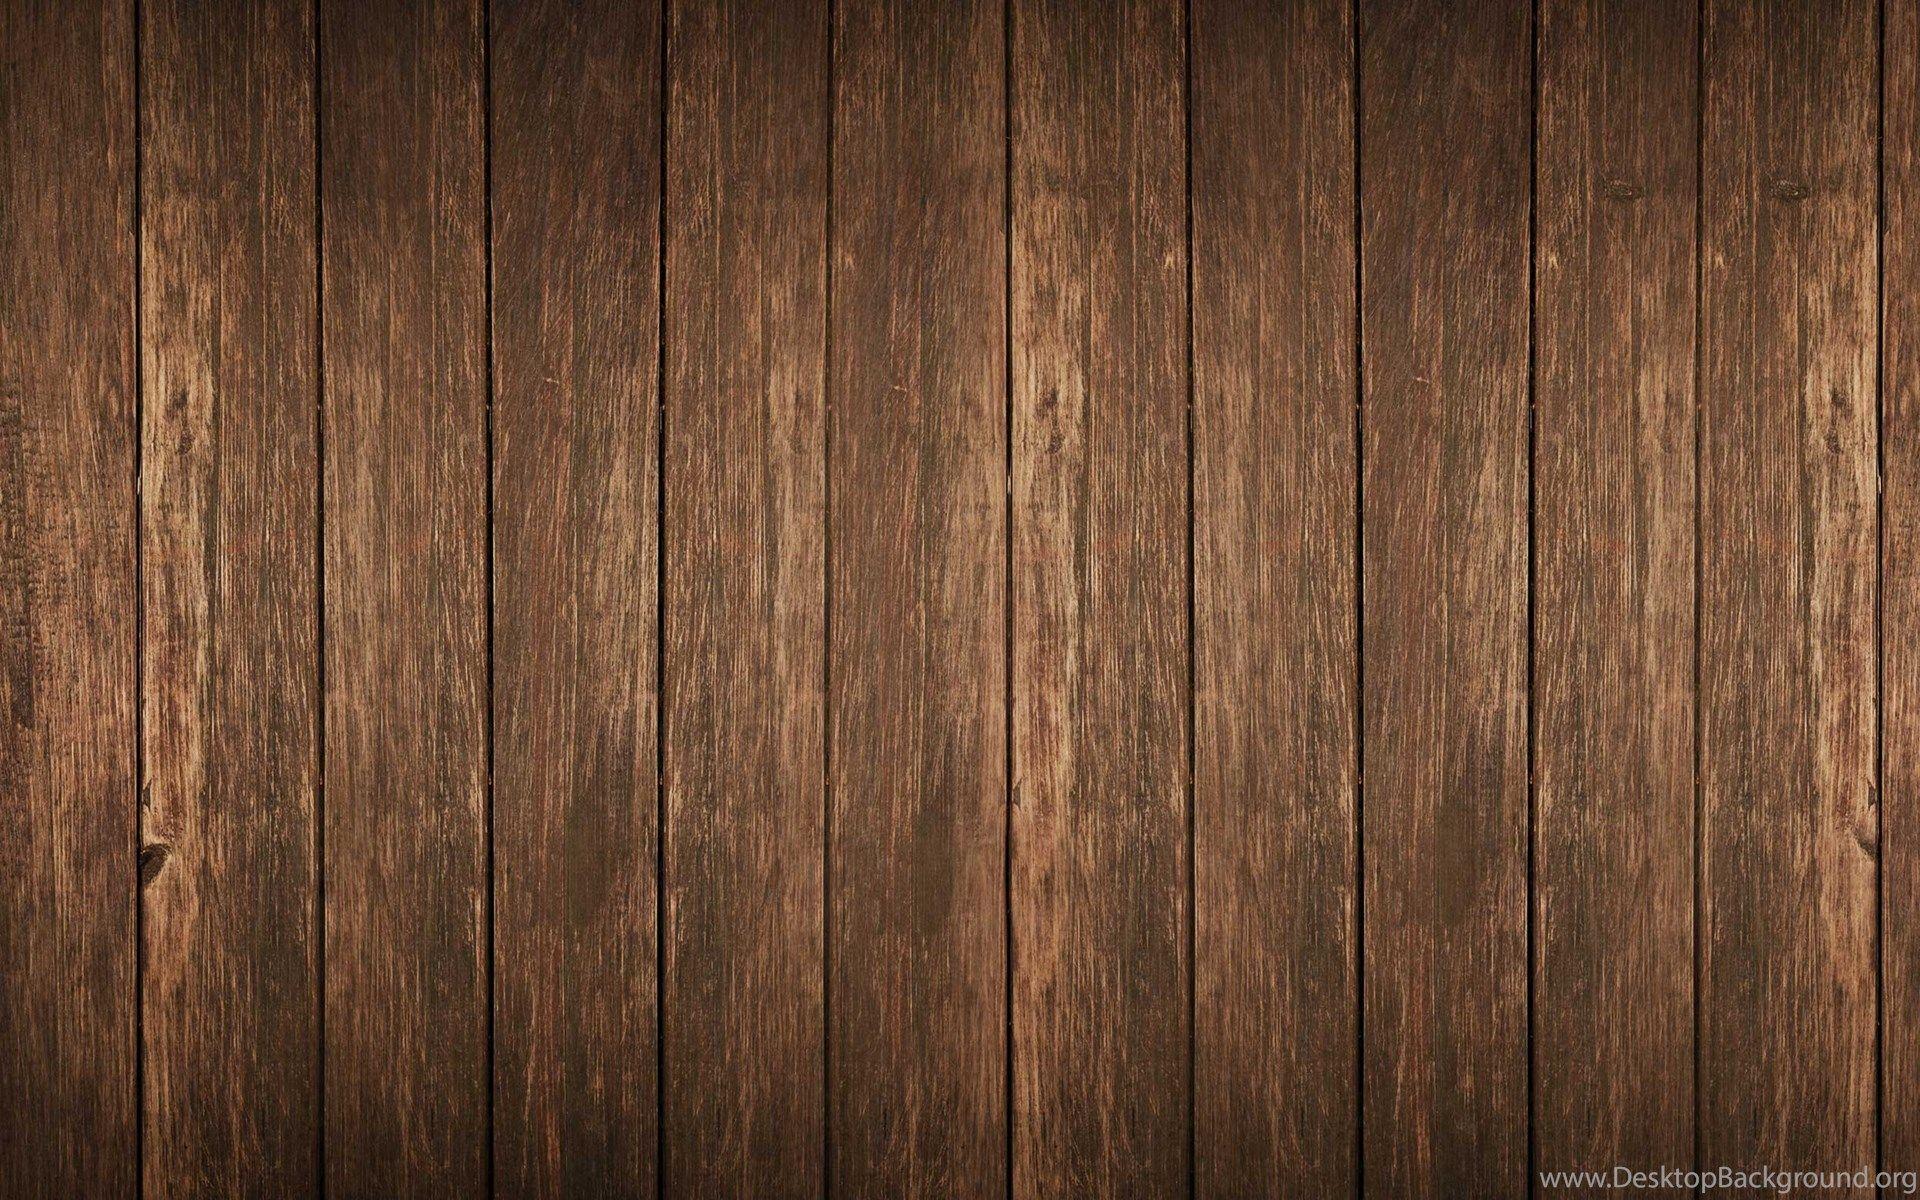 Western Wood Wallpapers - Top Free Western Wood Backgrounds ...